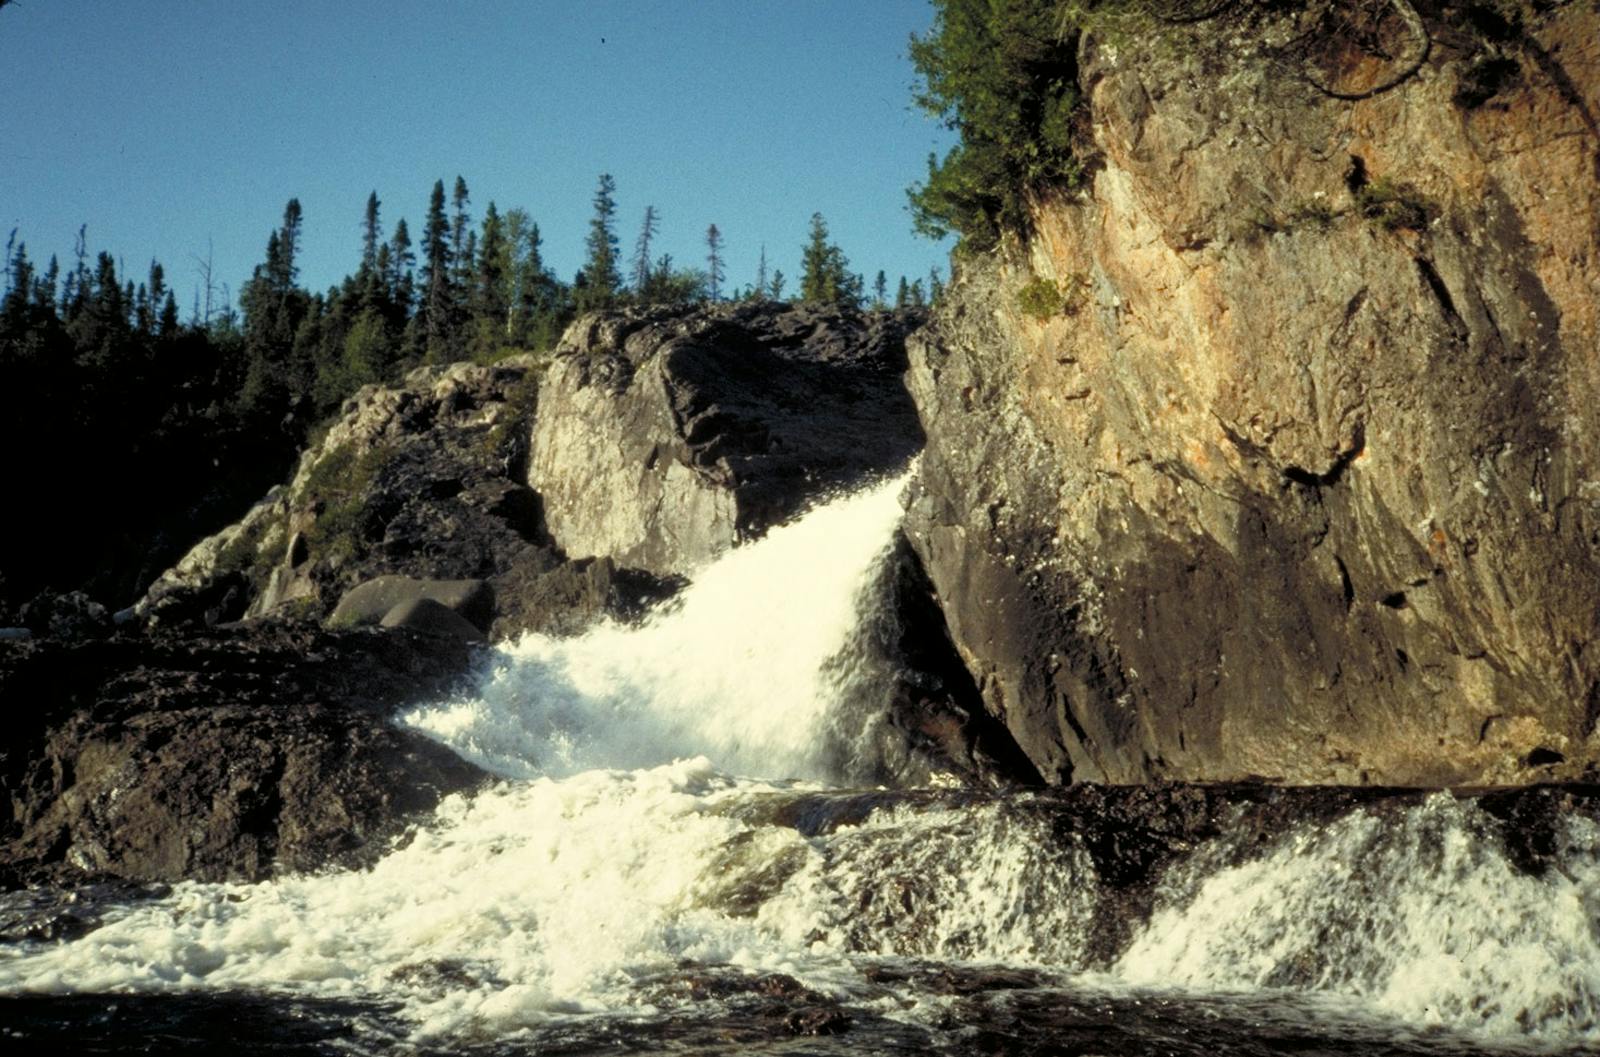 Central Canadian Shield Forests